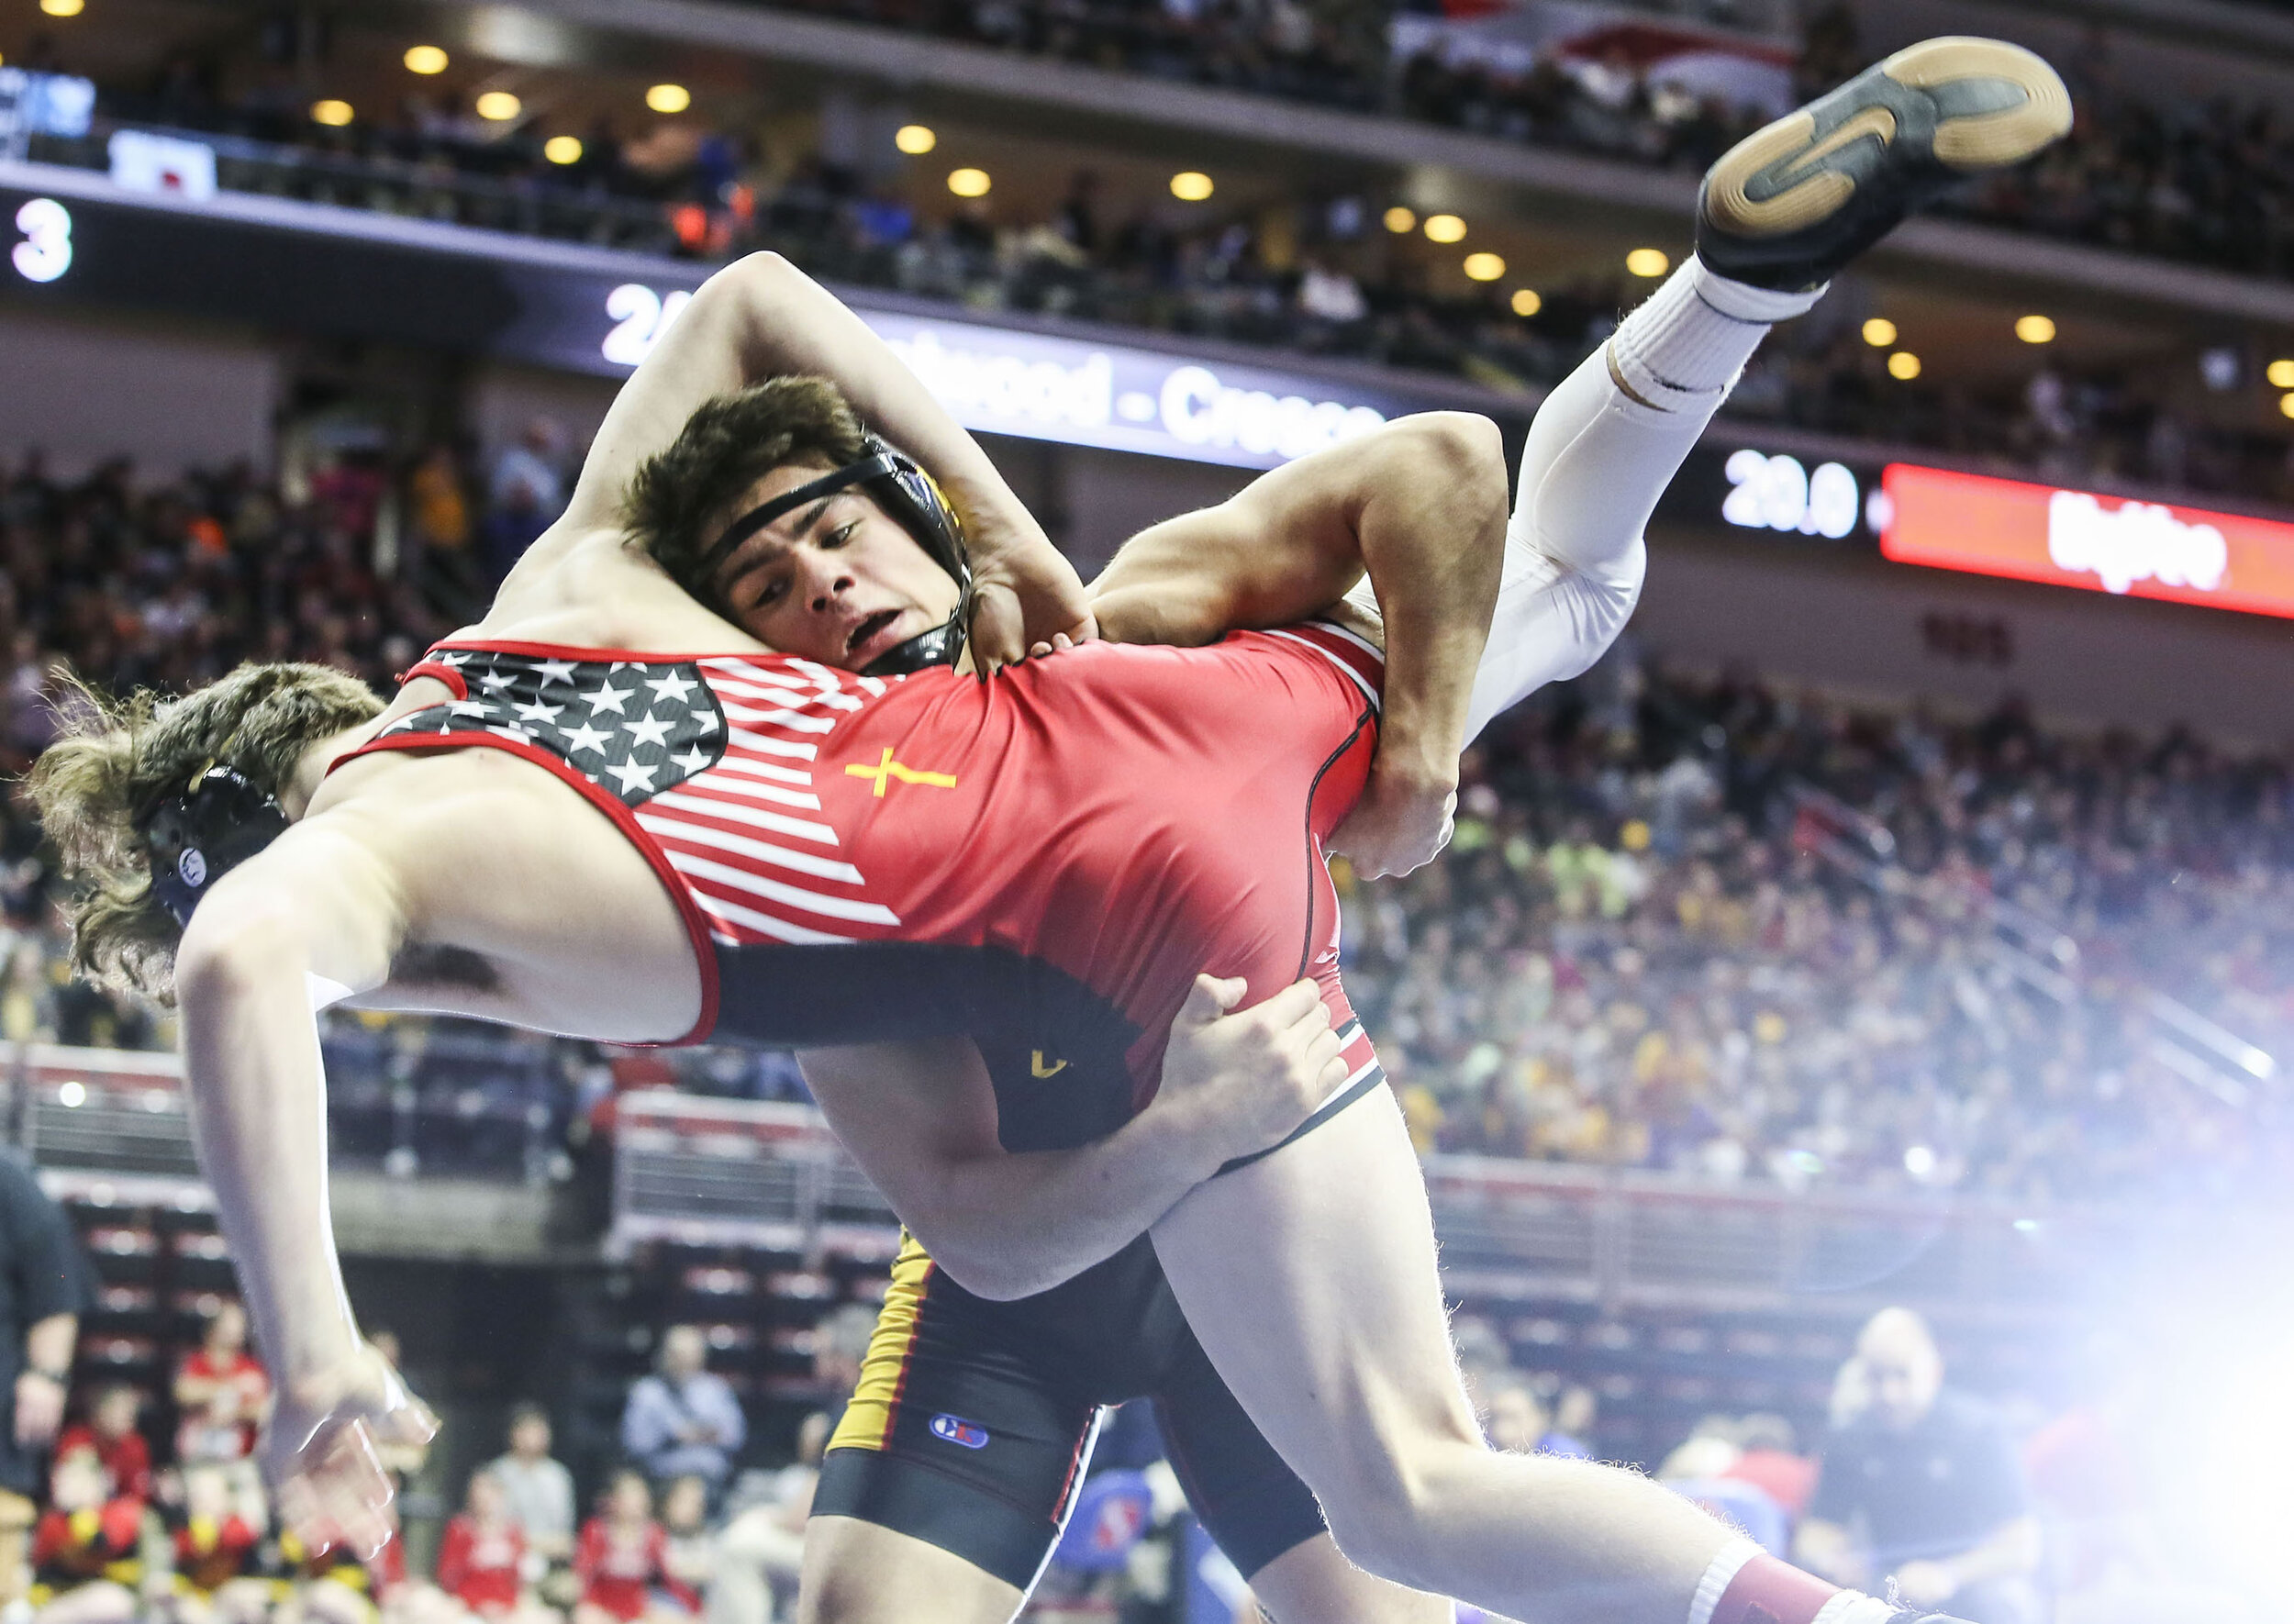  Assumption's Michael Macias wrestles against Iowa Falls/Alden's Alberto Salmeron in the 138 weight class during the 2020 Iowa State Wrestling Championships Class 2A at the Wells Fargo Arena in Des Moines, Thursday Feb. 21, 2020. 